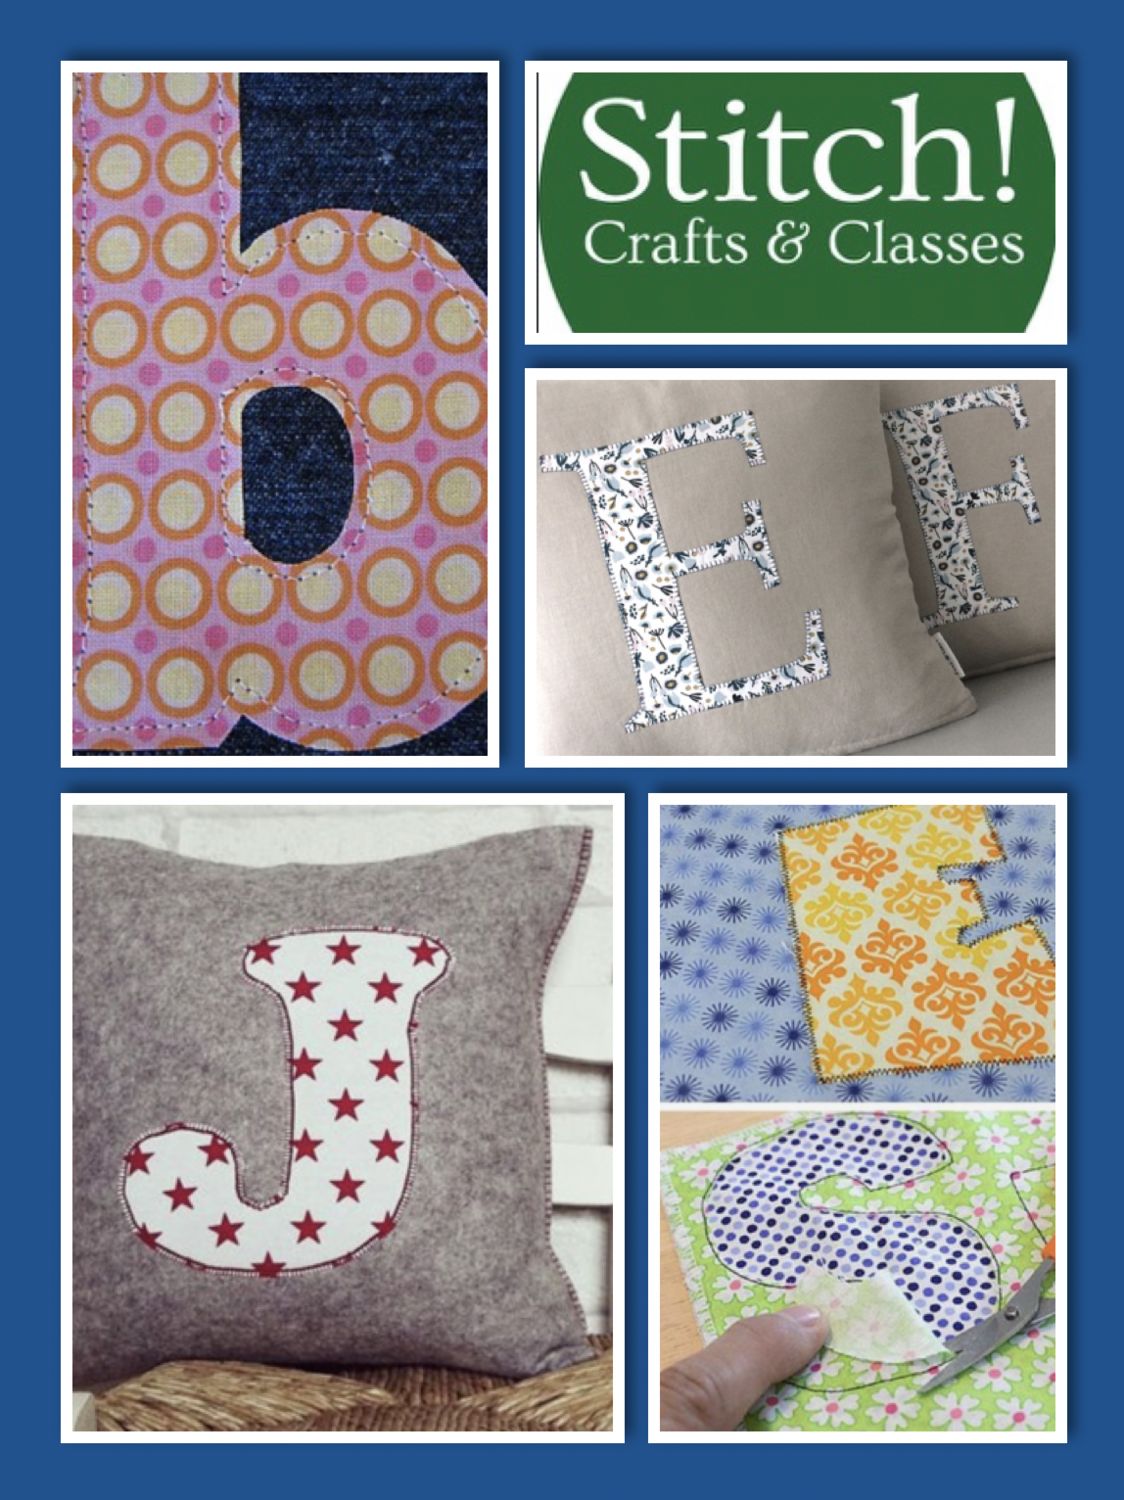 Learn to Sew A Personalised Cushion Cover! Friday 10th December, 11-1pm